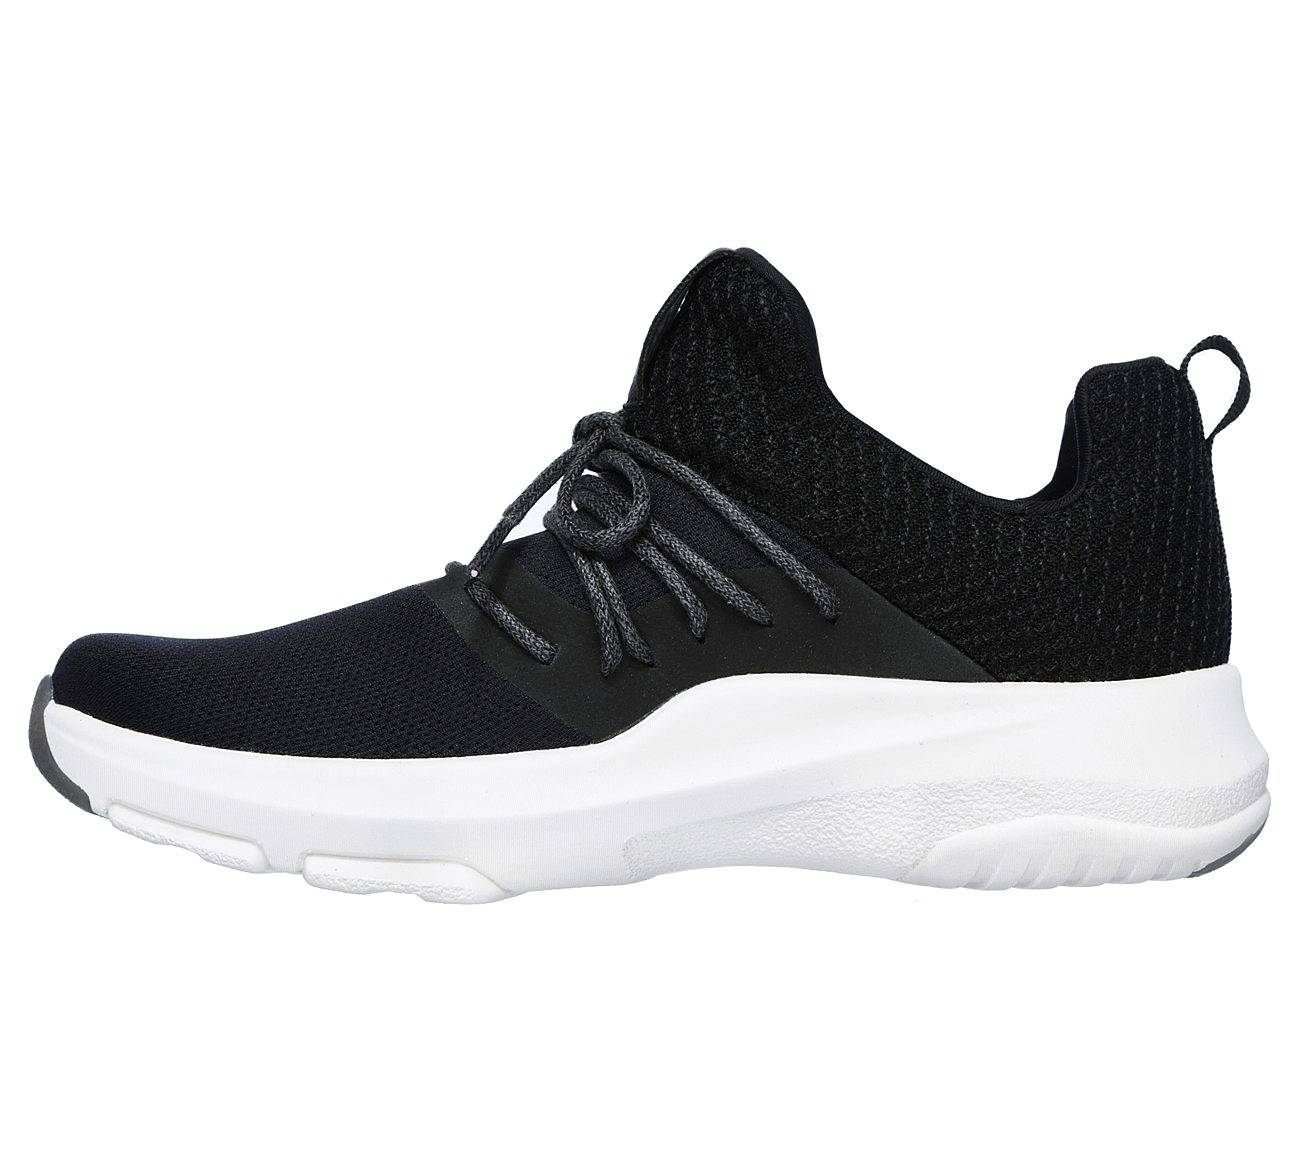 skechers one element ultra review